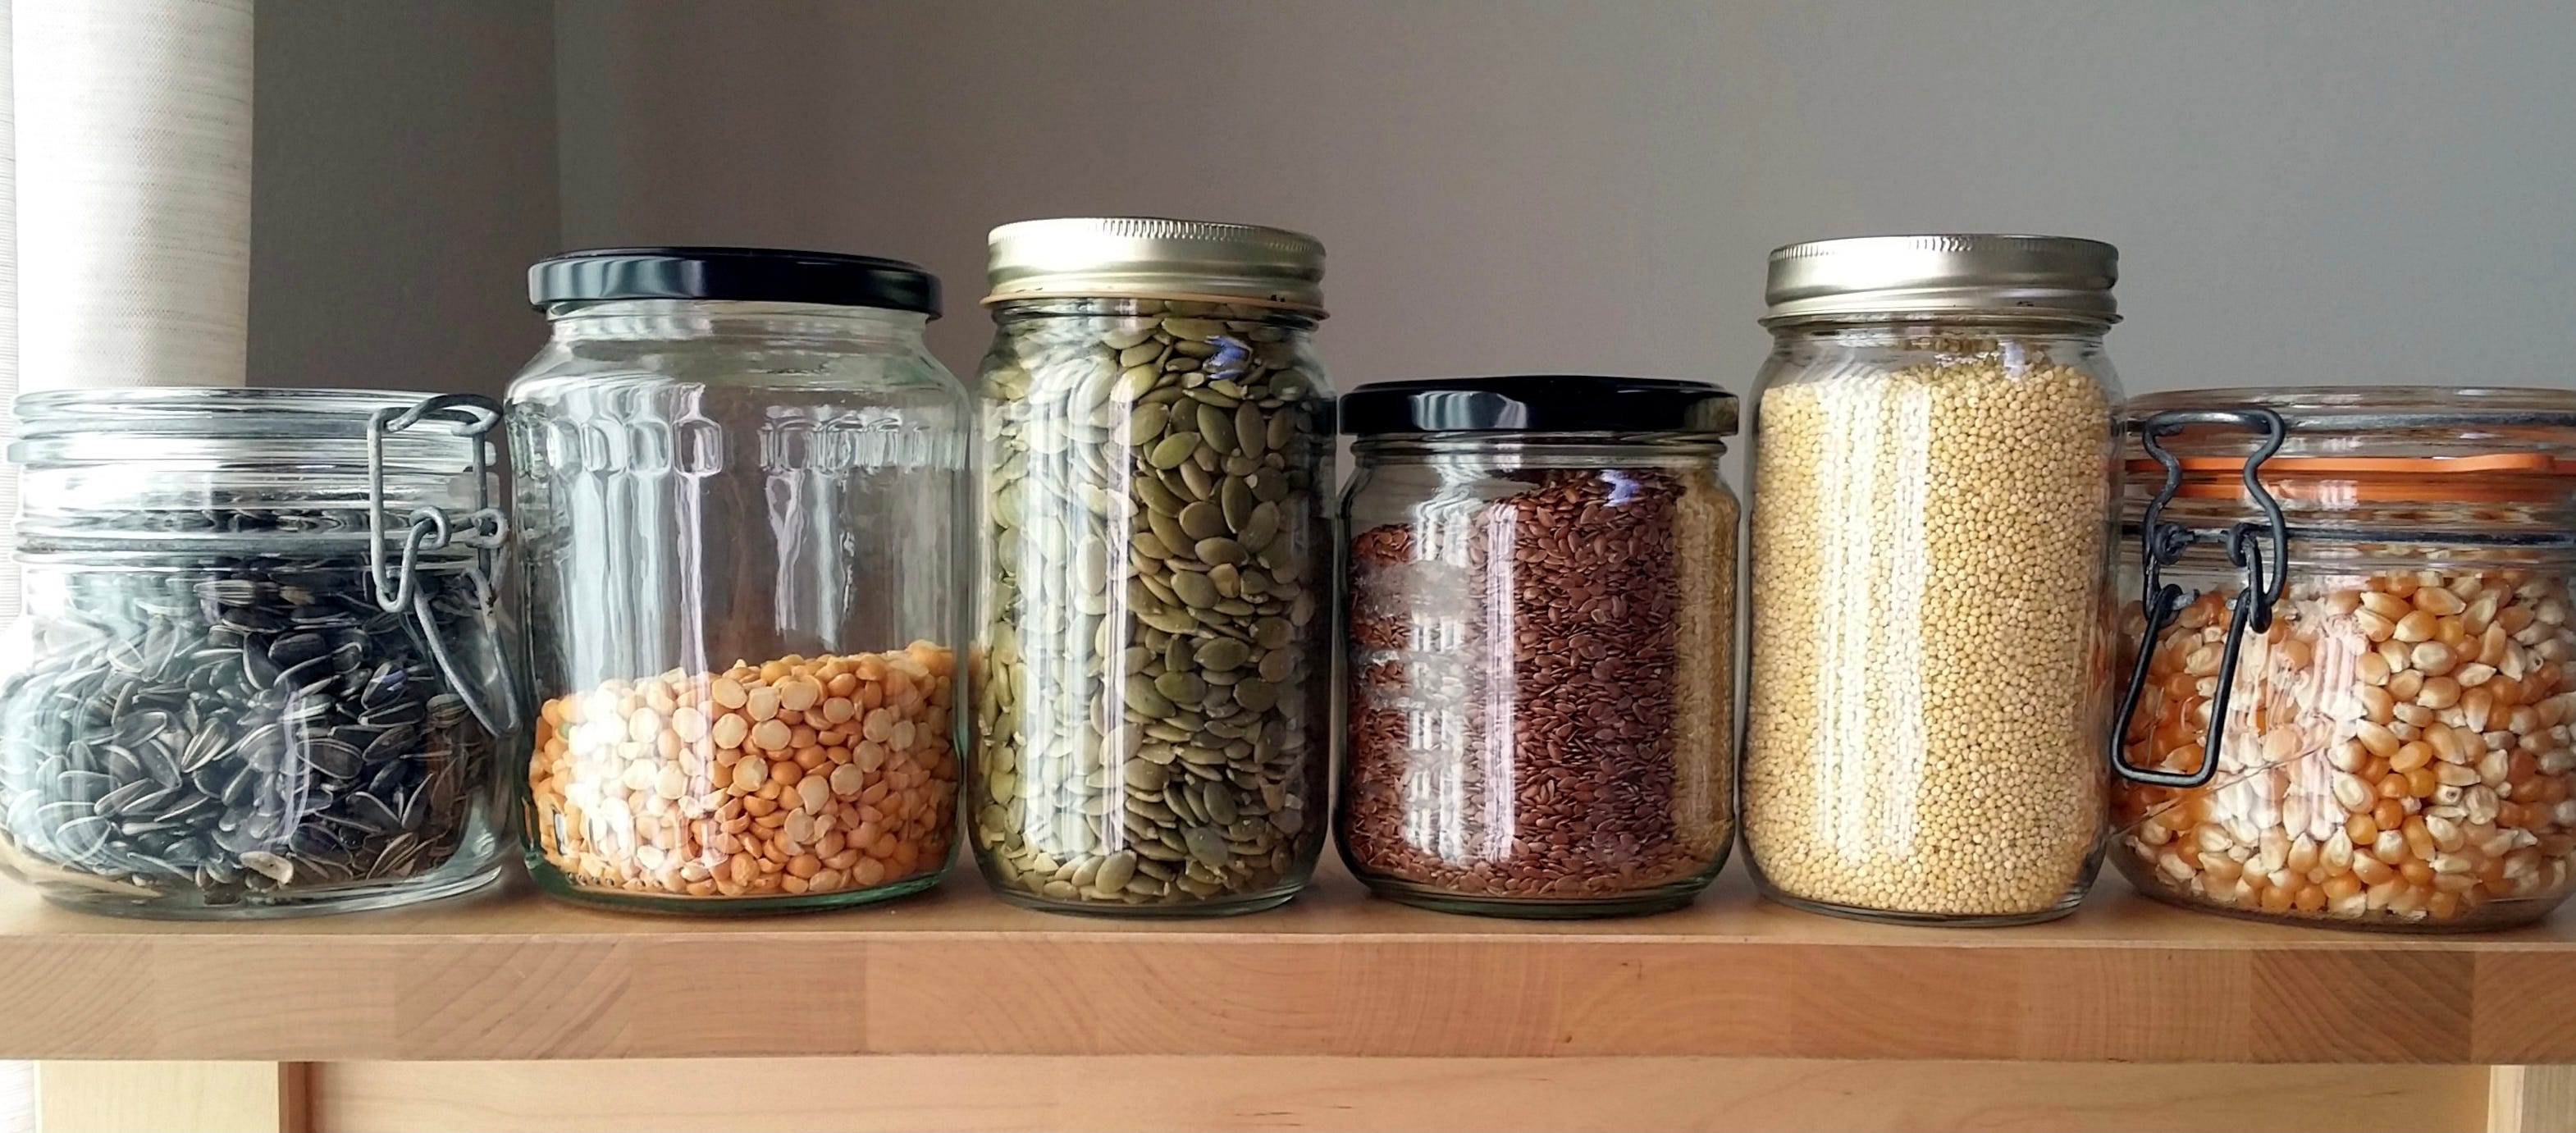 How To Use Your Own Containers For Bulk Shopping — The Fond Life